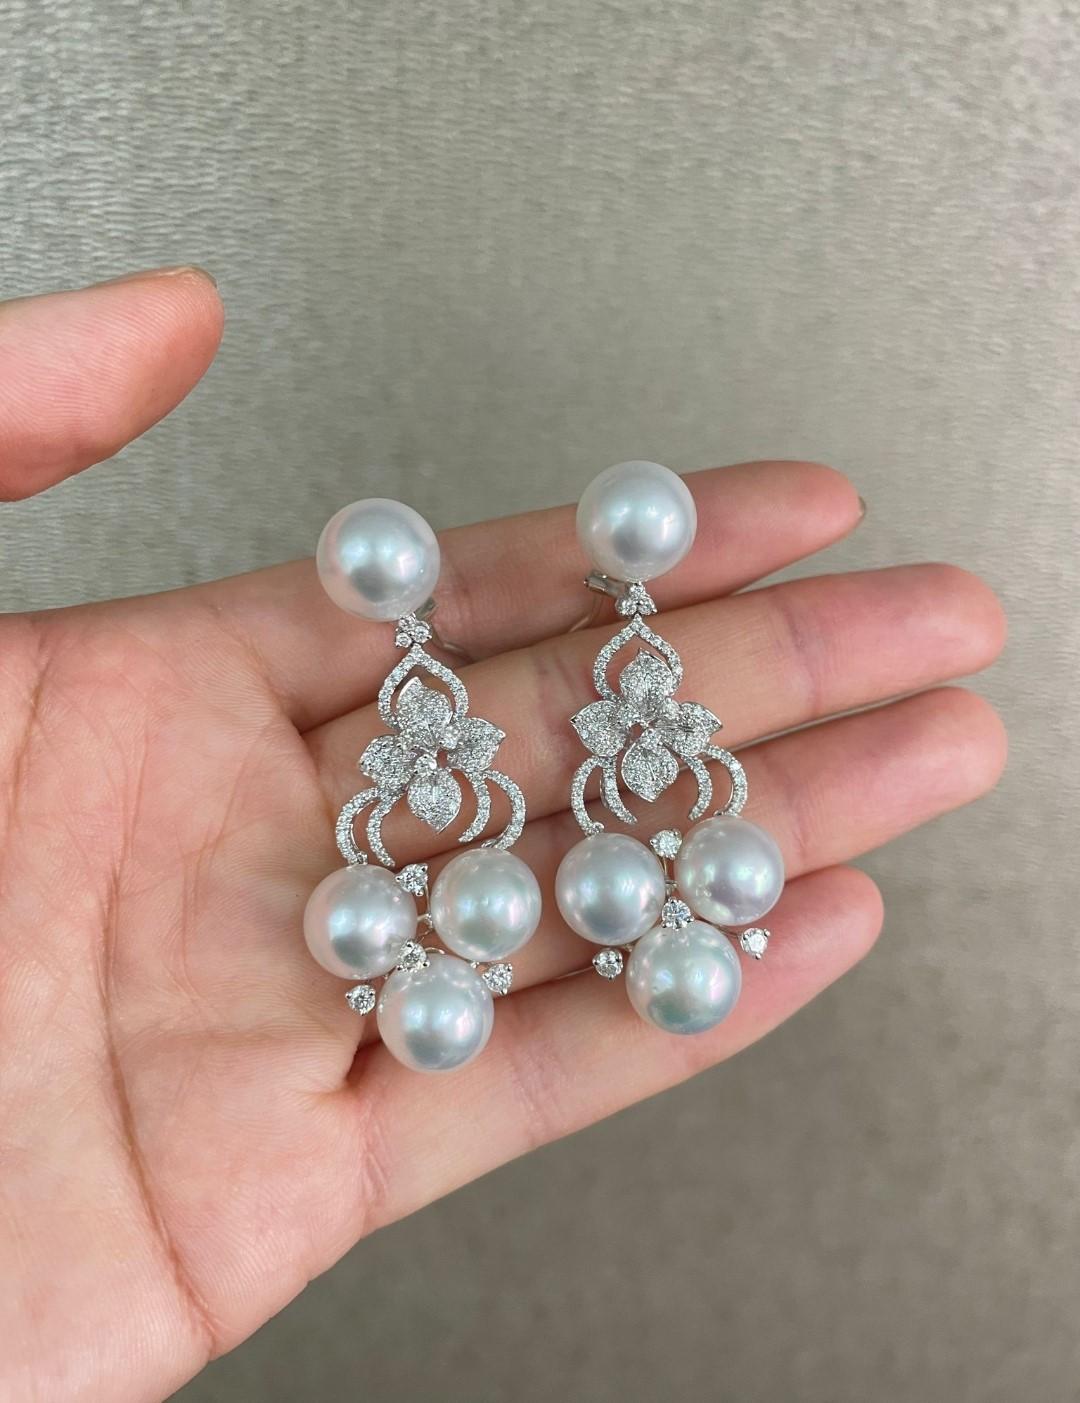 The Following Items we are offering are these Extremely Rare Beautiful 18KT Gold Fine Rare Large South Sea Pearl Fancy Diamond Dangle Drop Earrings. These Magnificent Earrings are comprised of 8 Rare Fine Large AA-AAA South Sea Pearls with Gorgeous